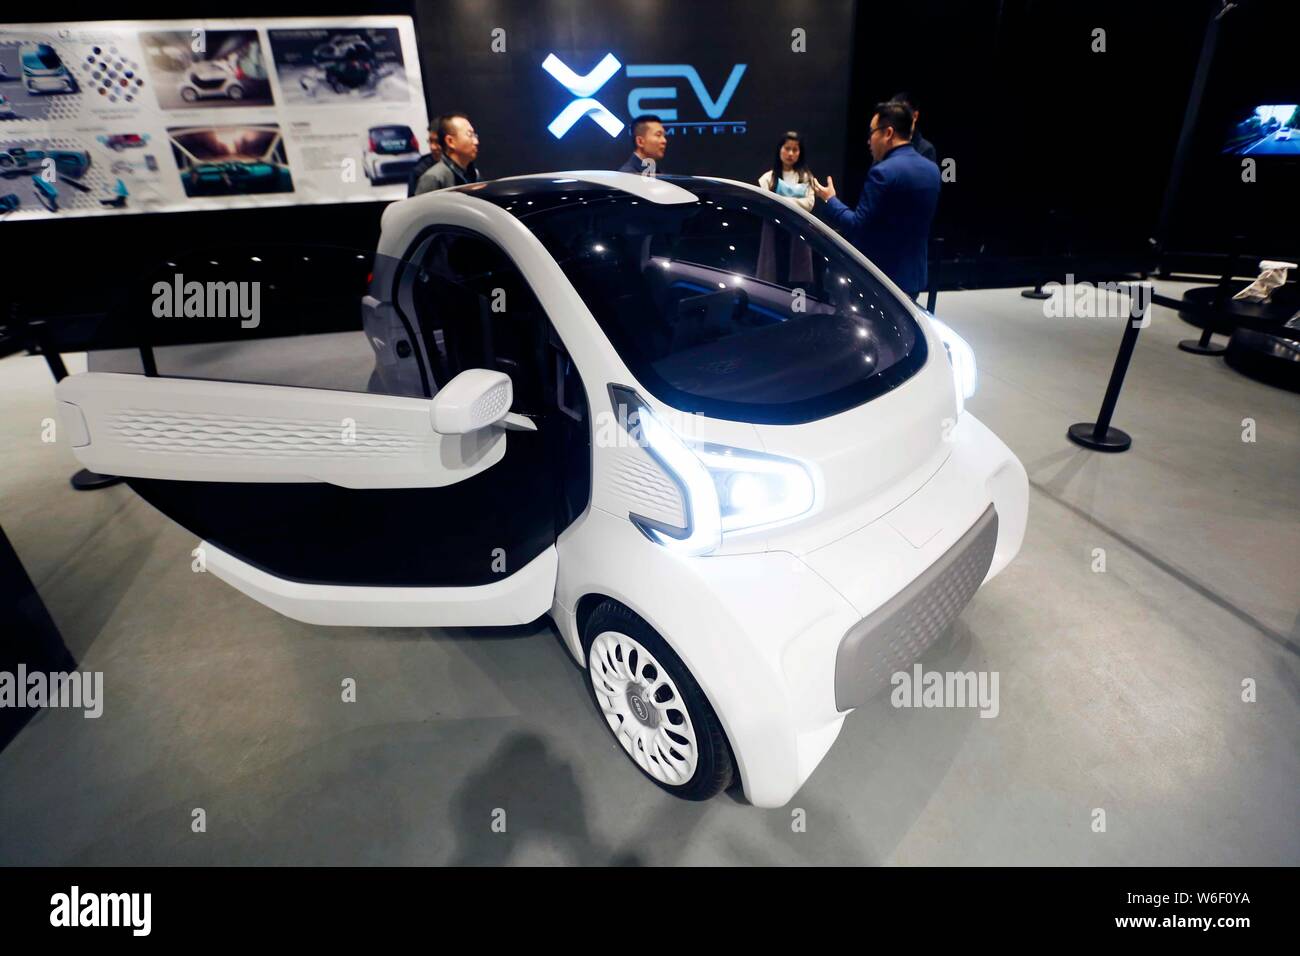 View Of A 3d Printed Lsev Electric Car Of Italy Based X Electrical